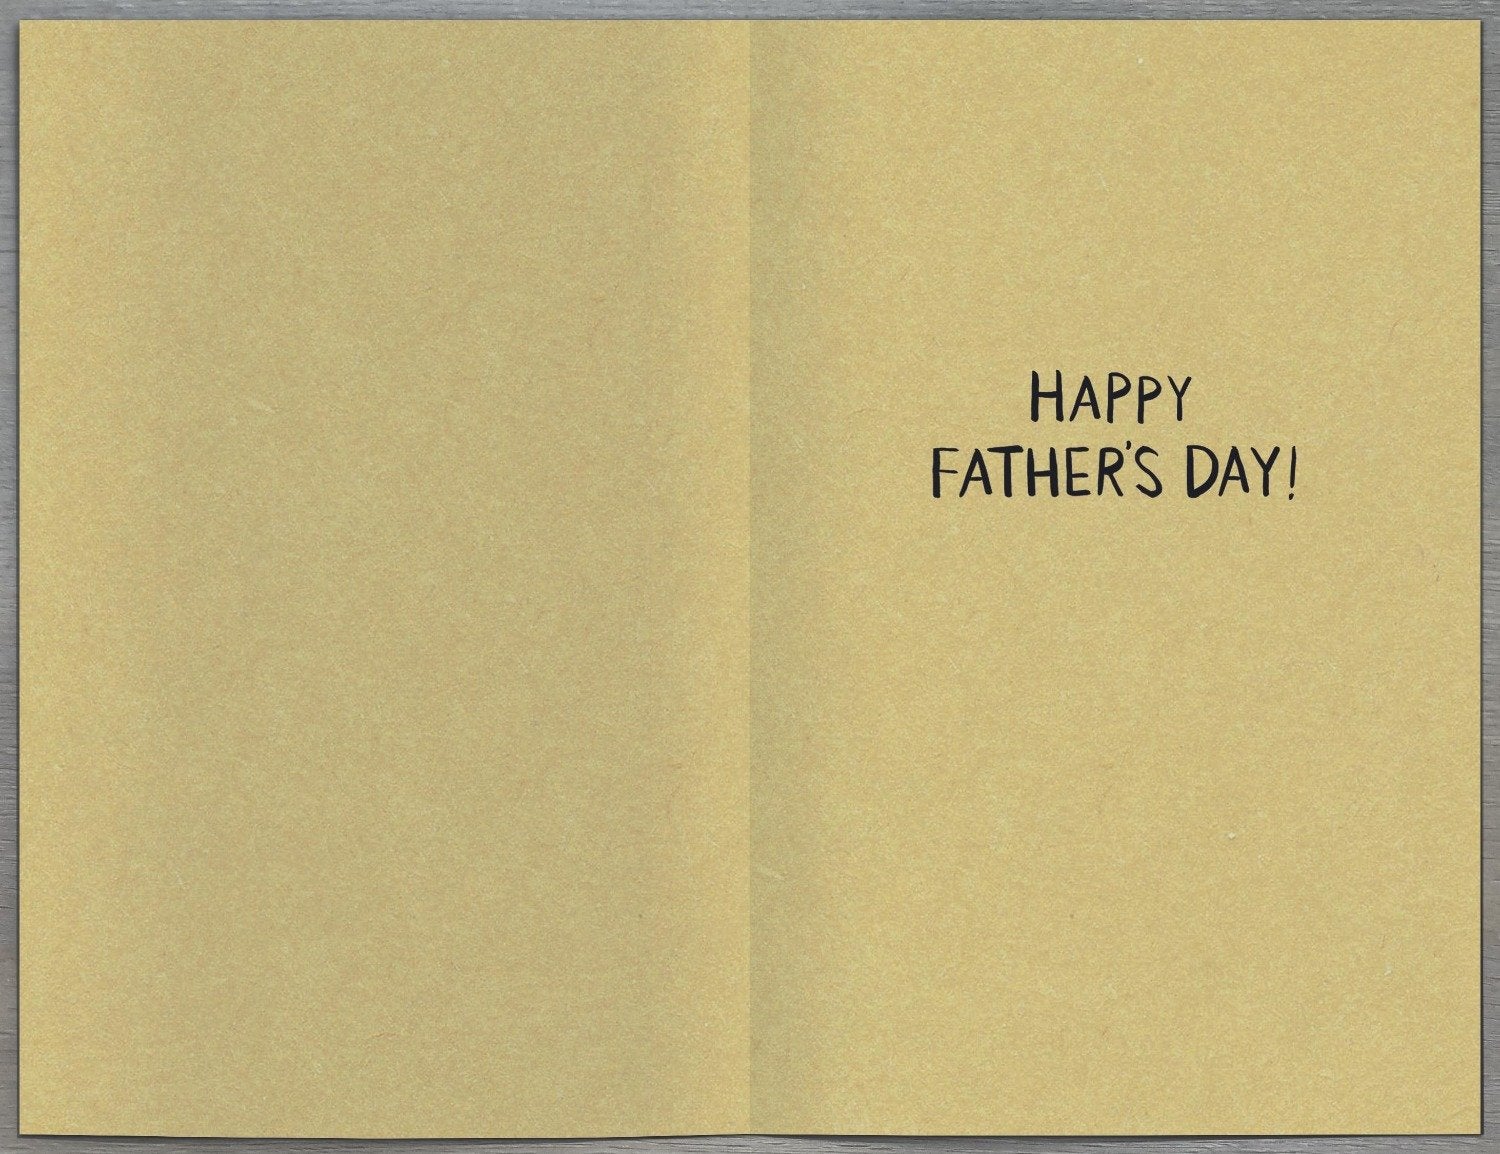 Fathers Day Card - Dad / You Taught Me Everything I Know...& A Rocket